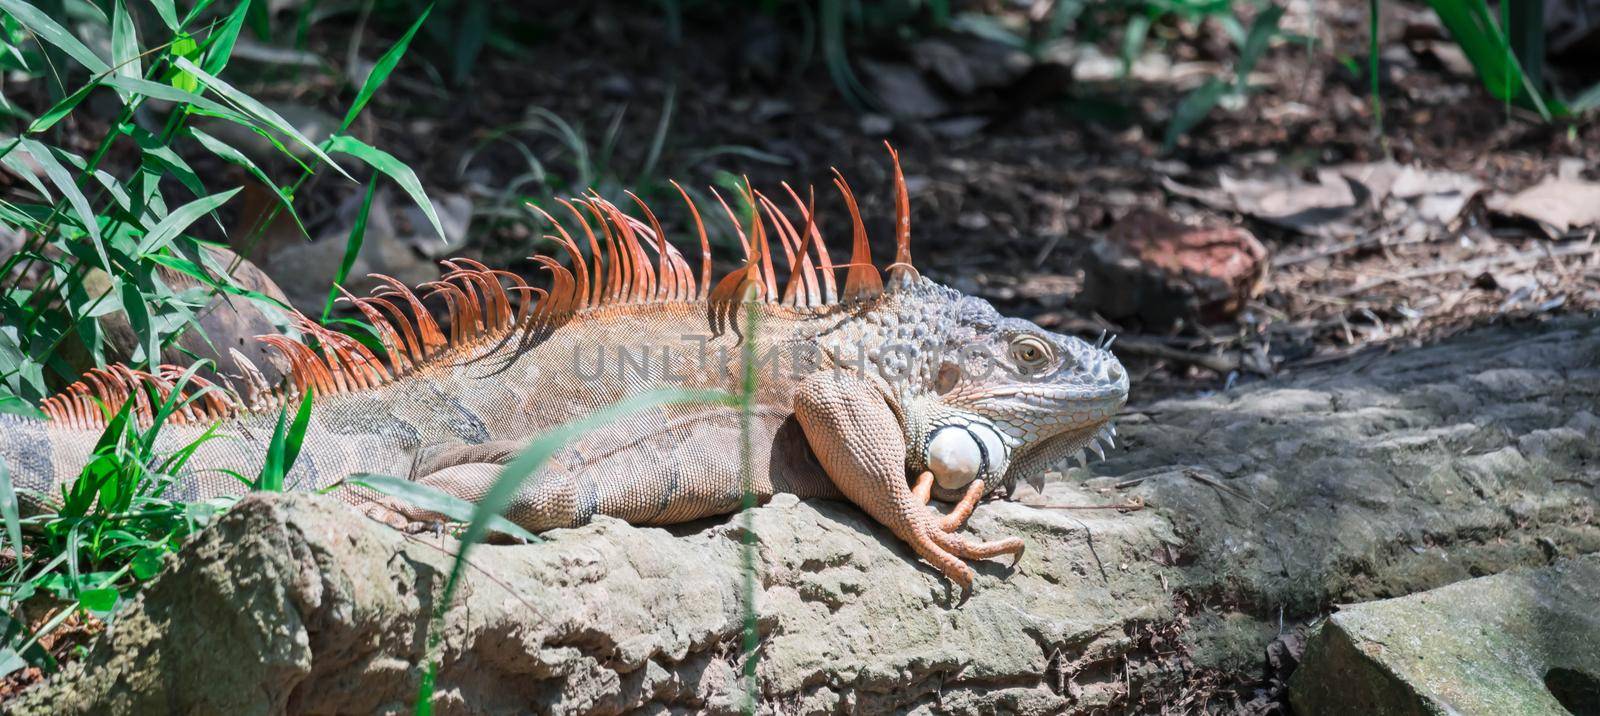 A Lizard Iguana, in a zoo where lizards live. Iguana is a genus of herbivorous lizards that are native to tropical areas of Mexico